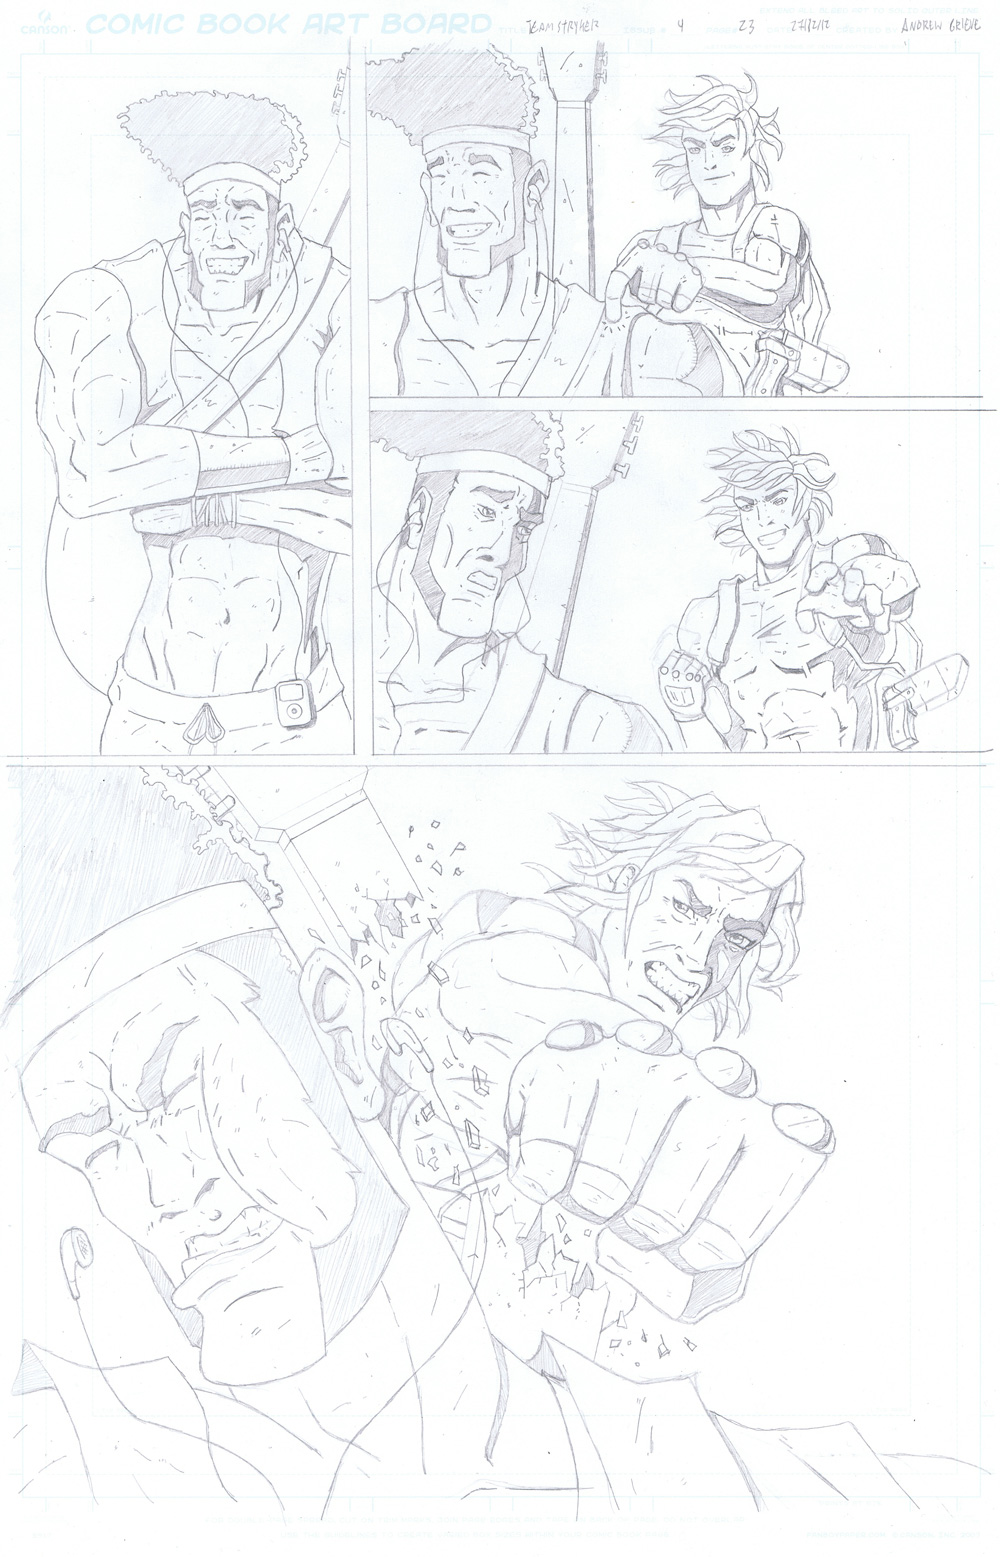 MISSION 004: PAGE 23 PENCIL